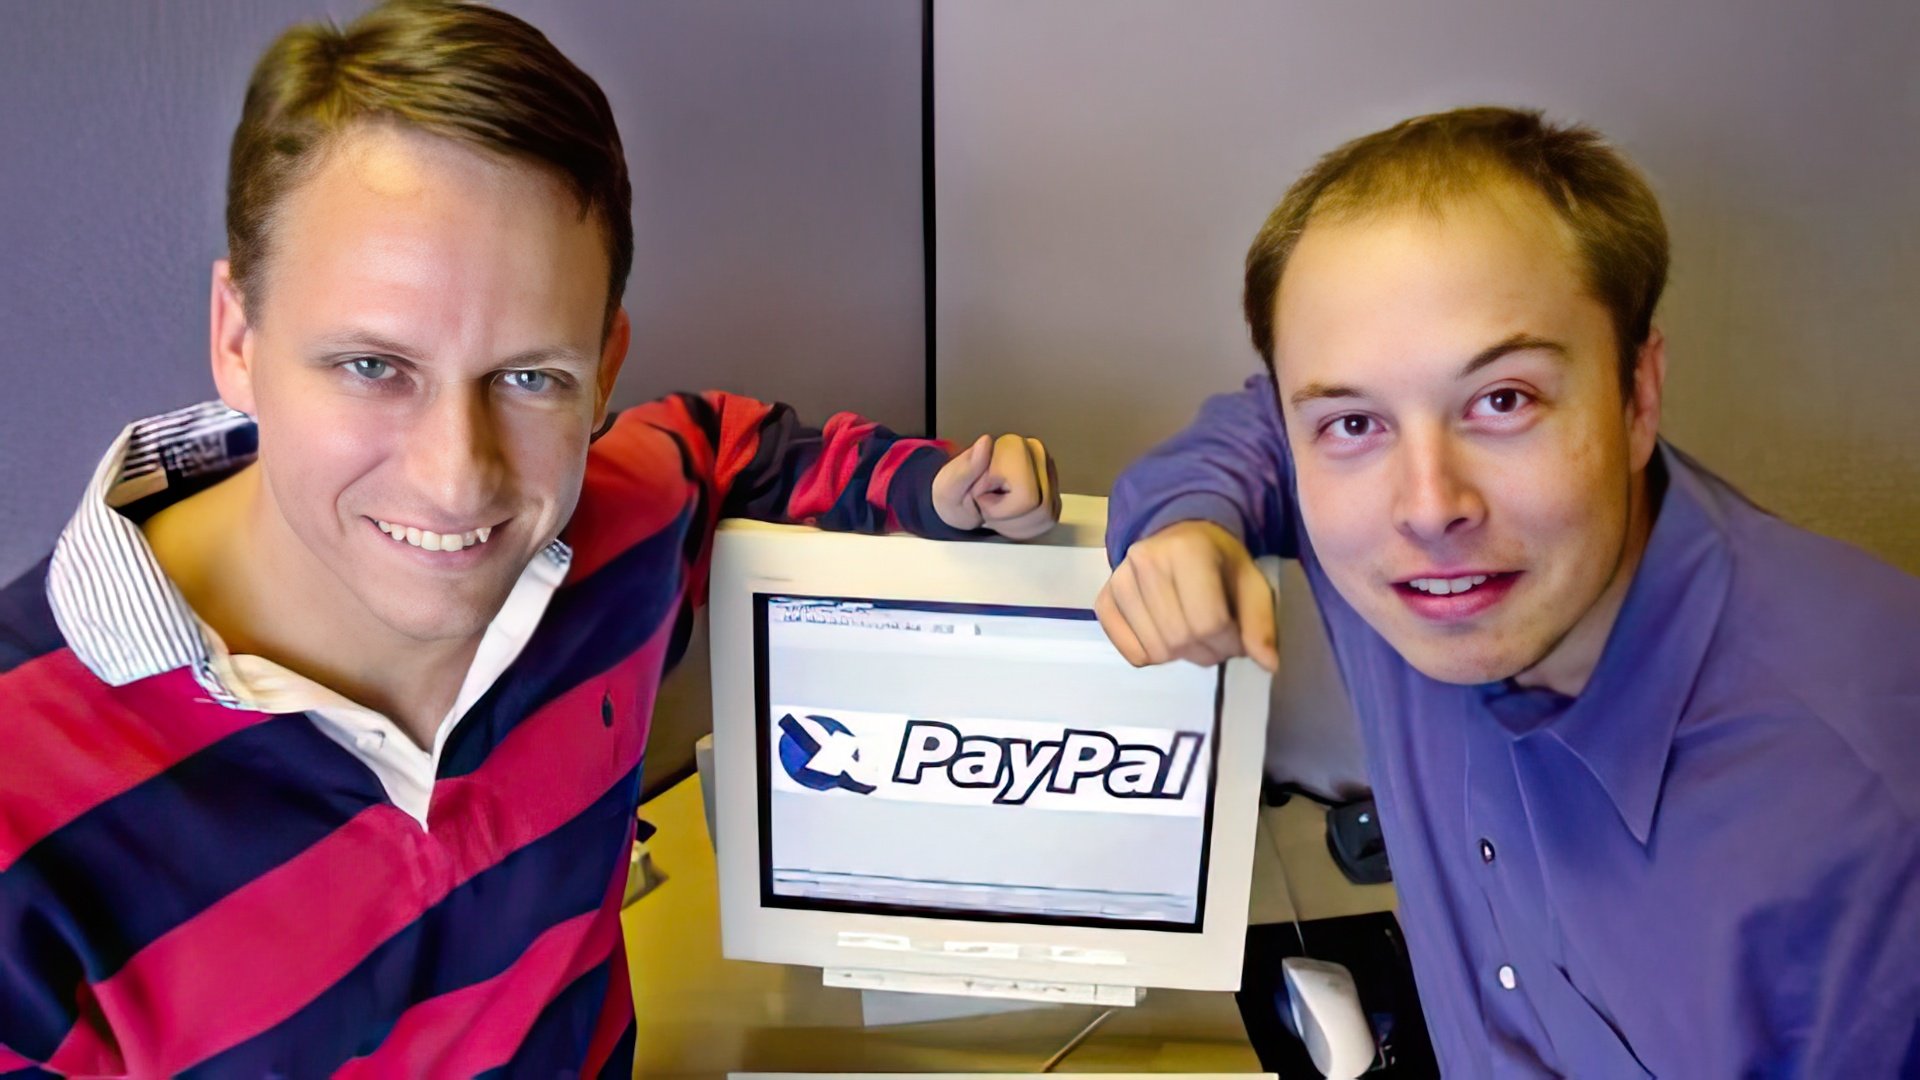 Elon Musk was one of the founders of PayPal